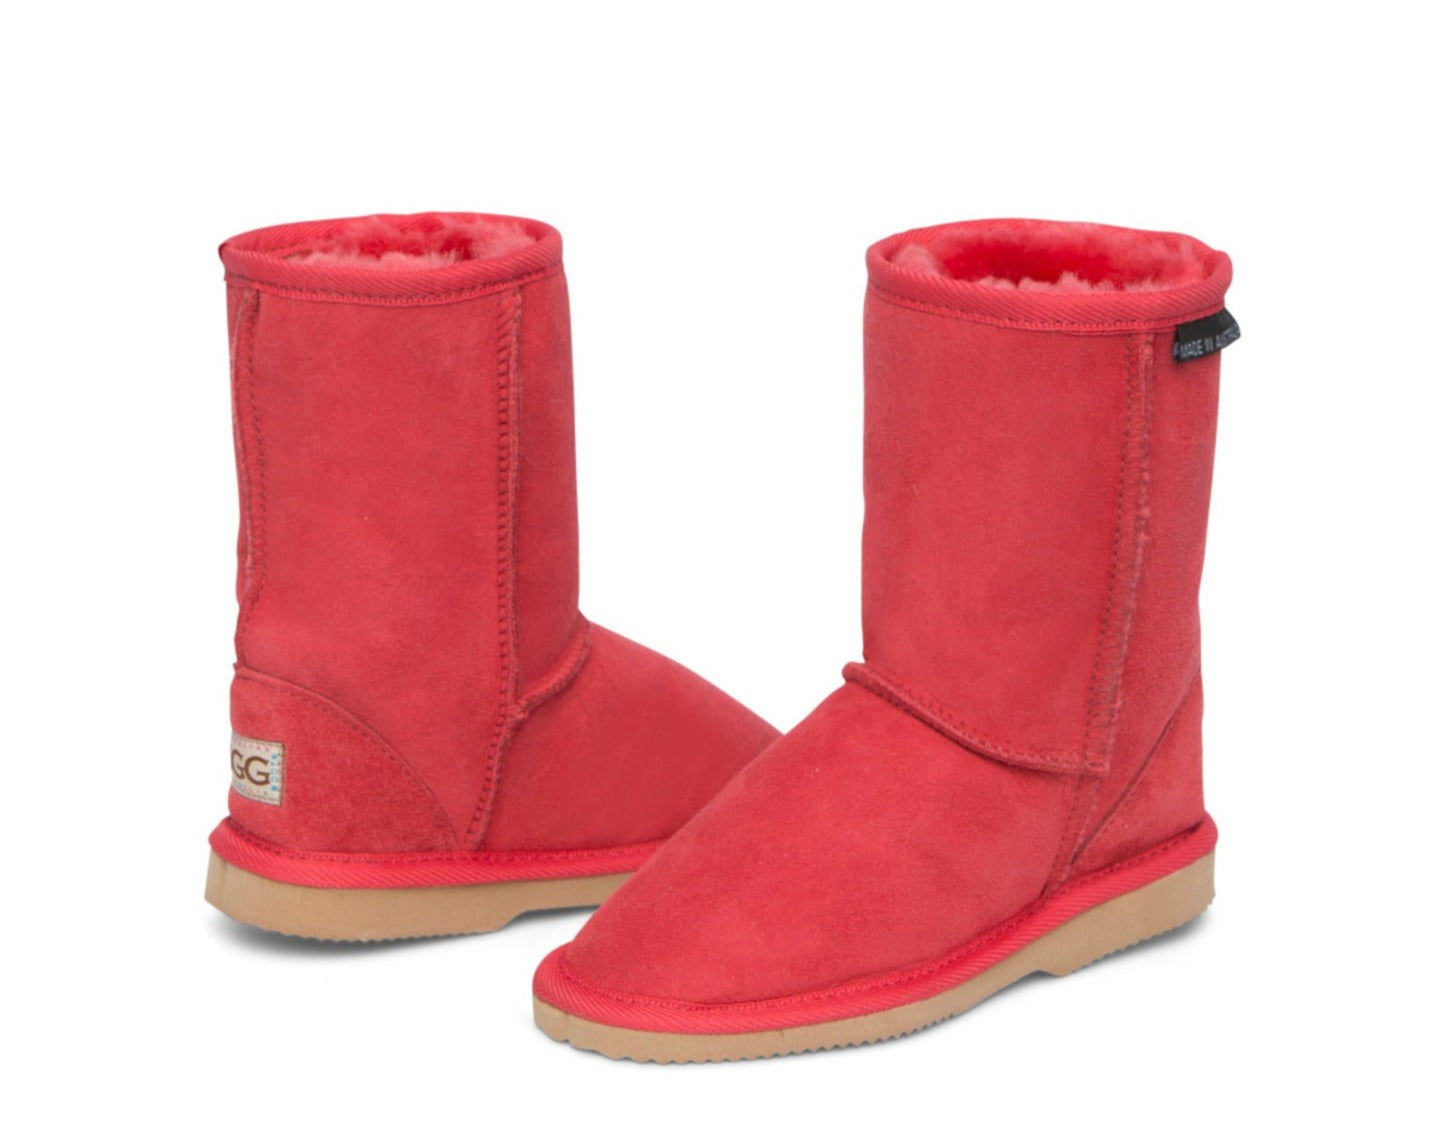 Kid's Classic Ugg Boots in Scarlet